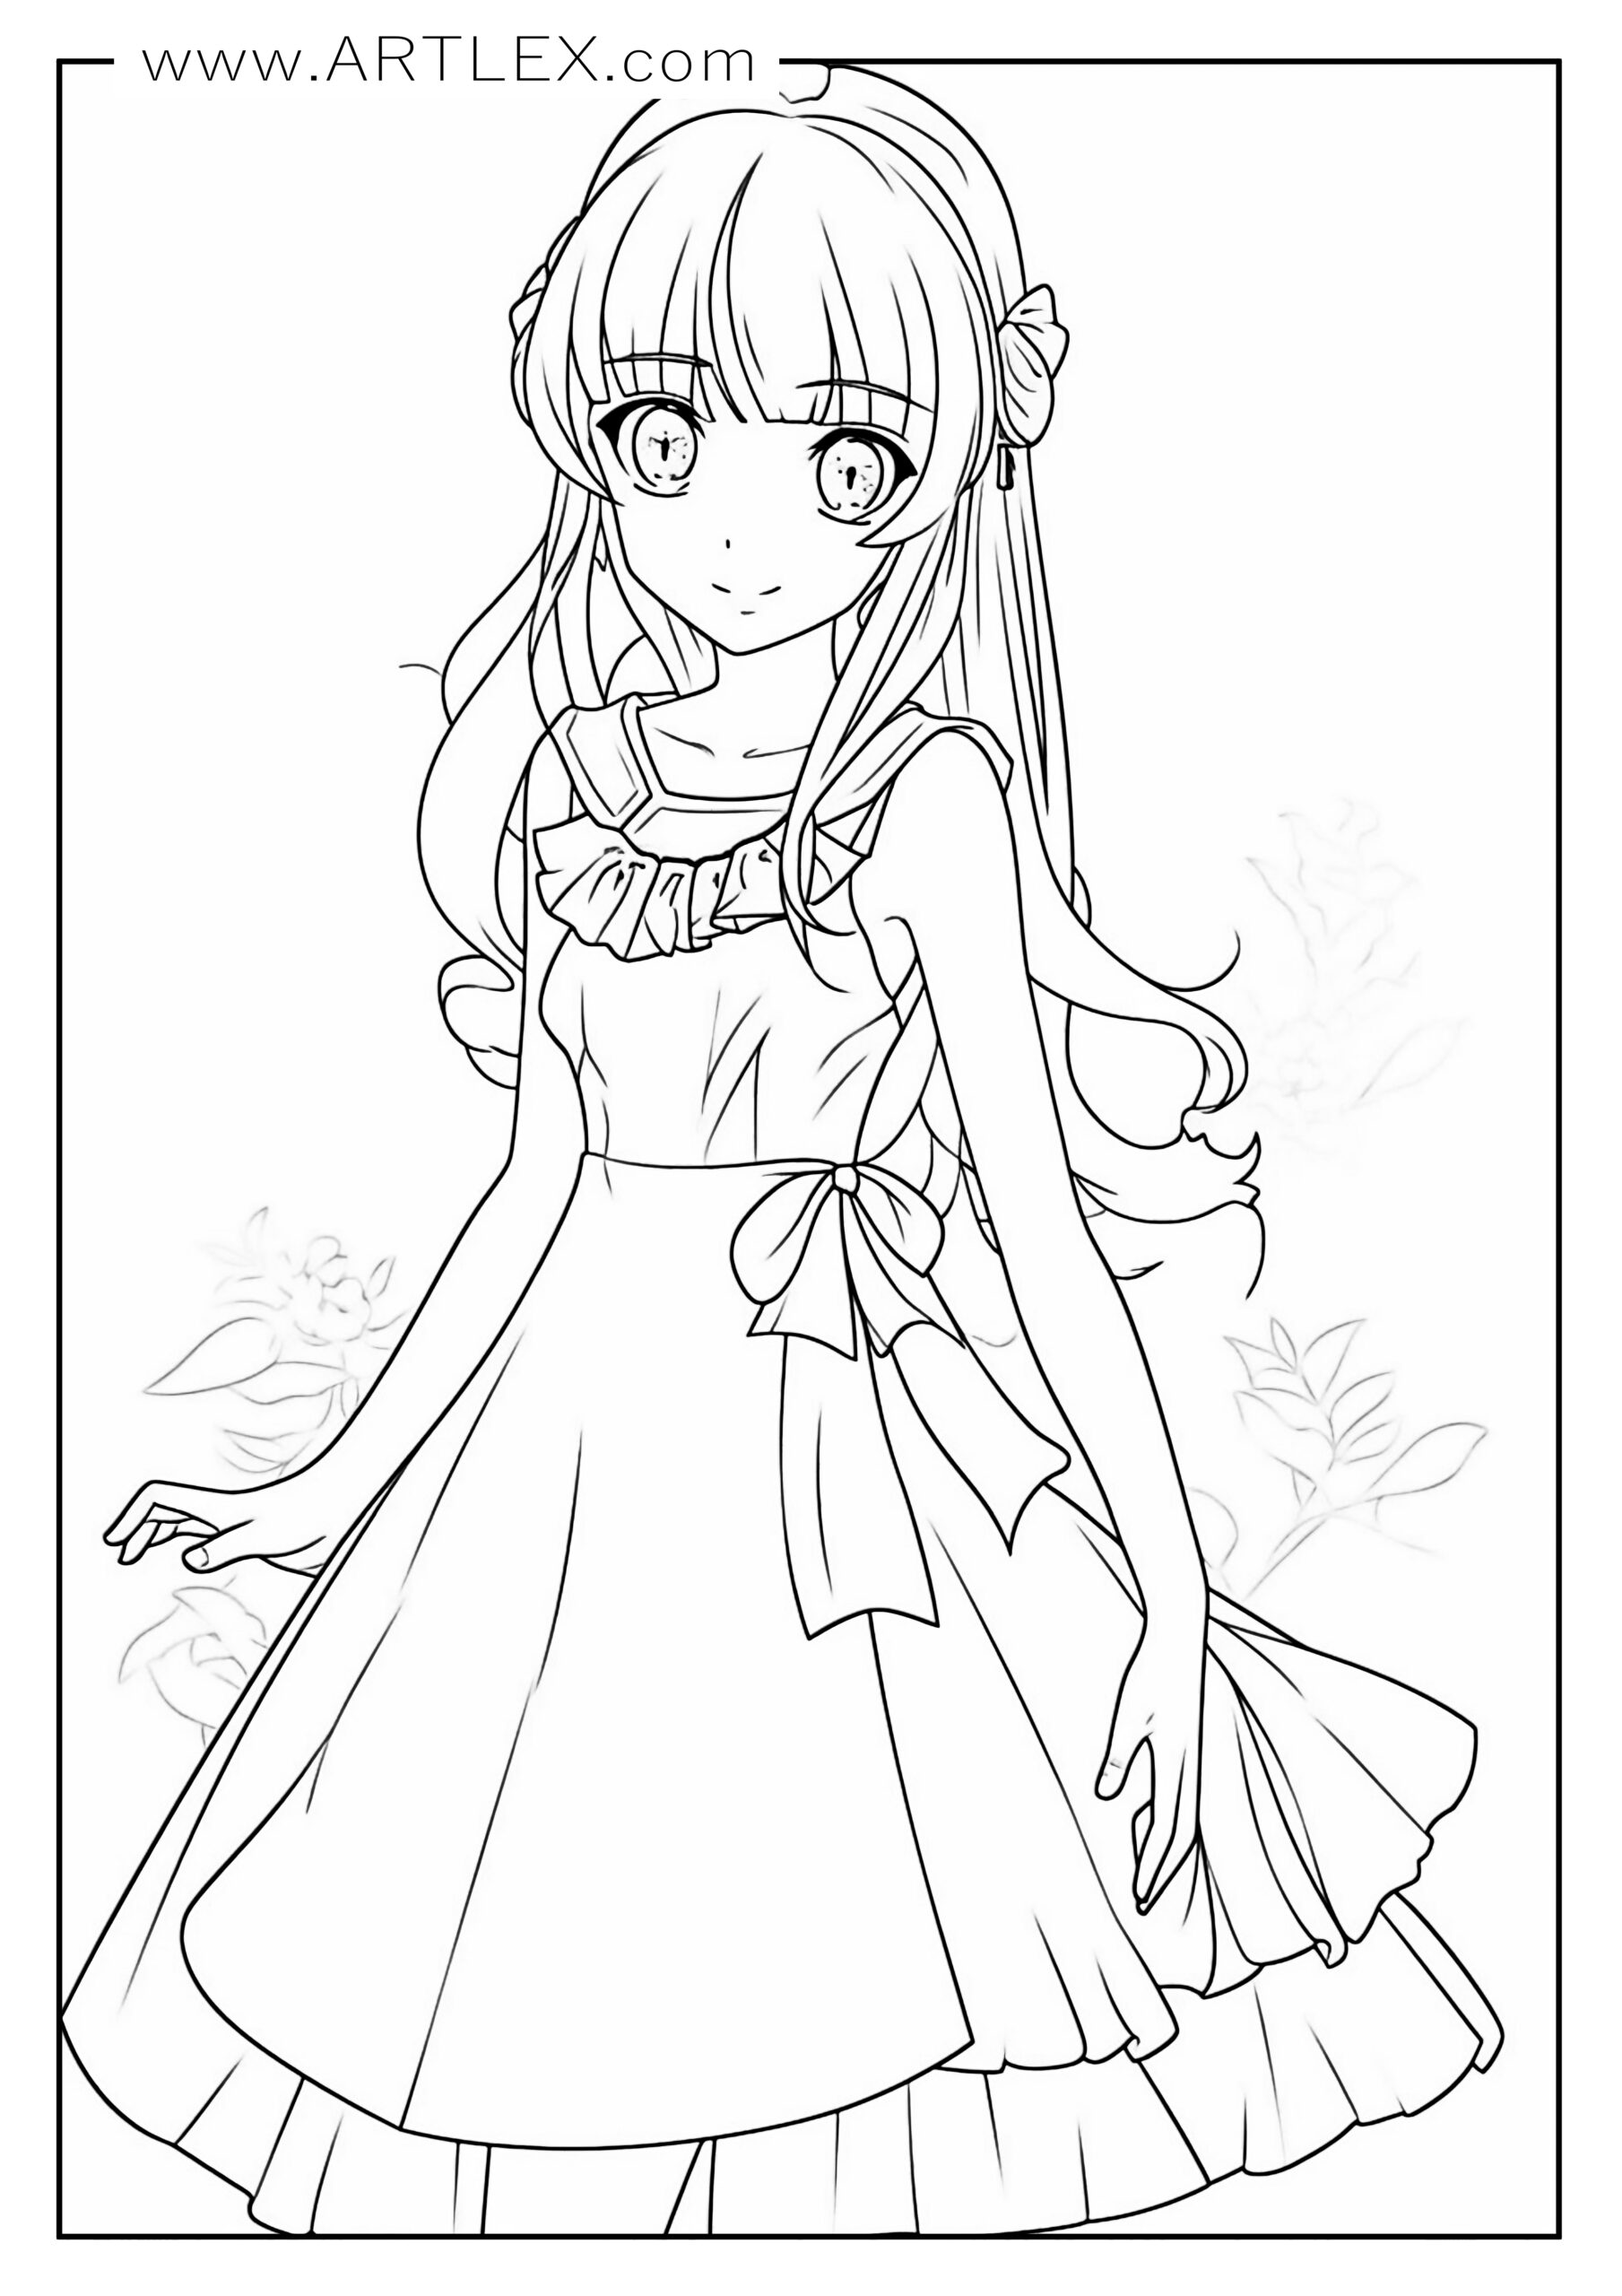 A ORIGEM Z  Anime girl drawings, Cute coloring pages, Coloring pages